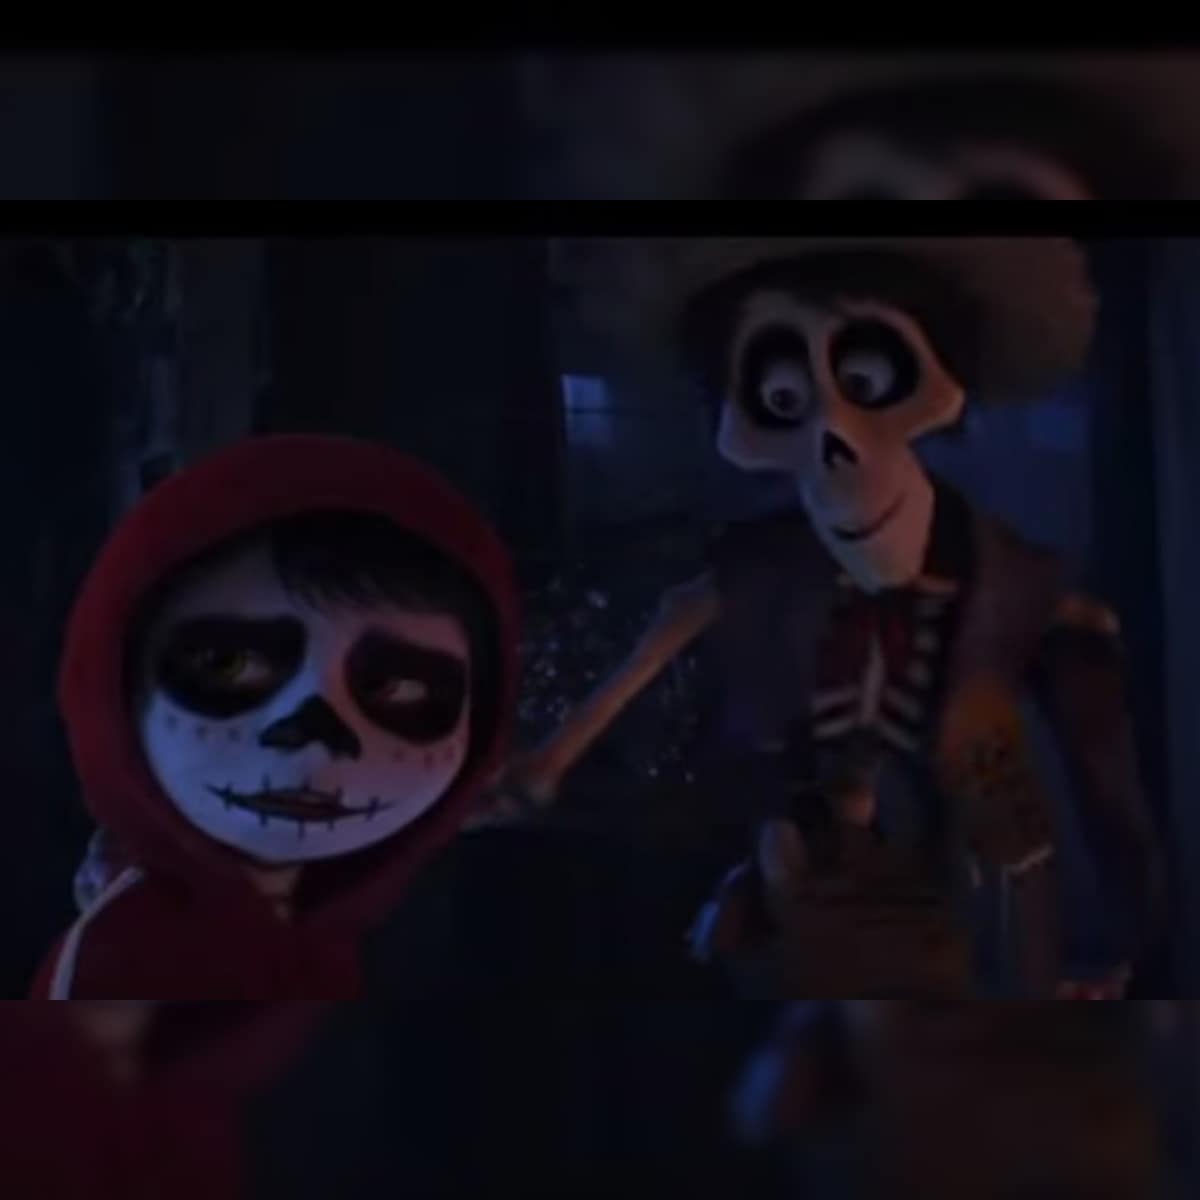 Pixar's Coco Trailer: The New Animated Film is a Mexican-inspired Musical  with a Message